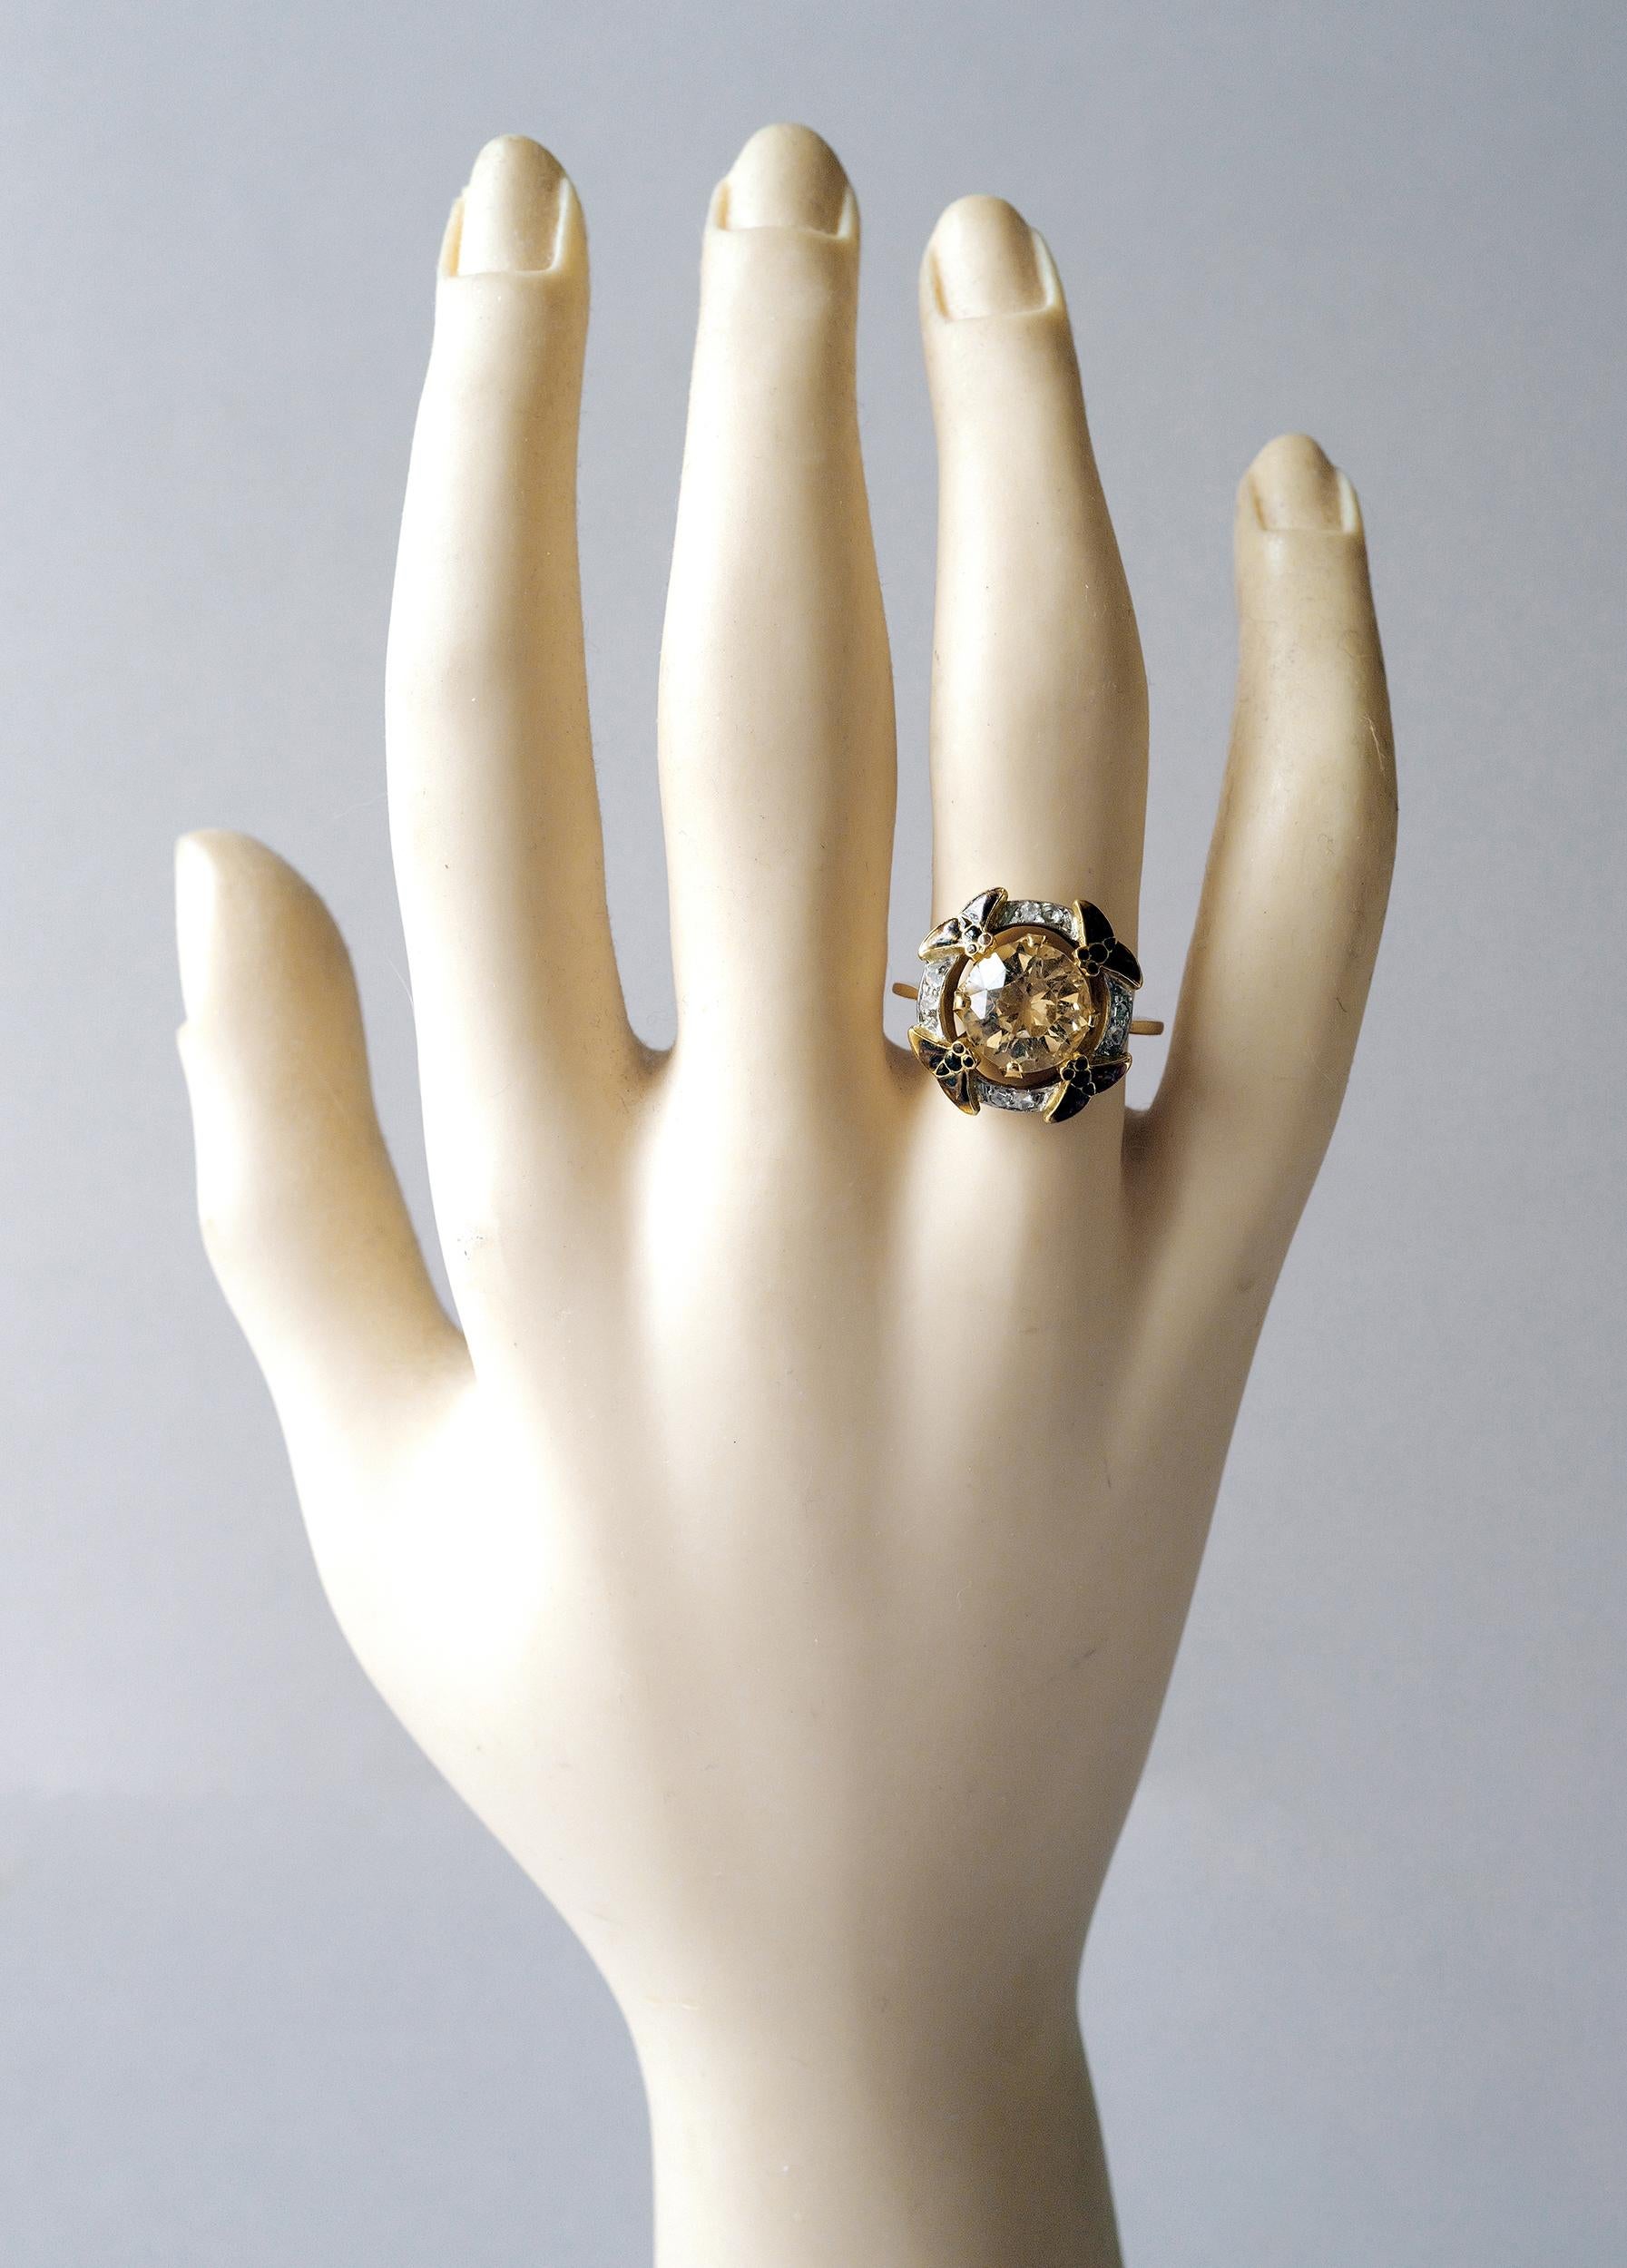 EUGÈNE FEUILLÂTRE An Art Nouveau Gold, Topaz and Diamond Insect Ring circa 1900 In Good Condition For Sale In London, GB